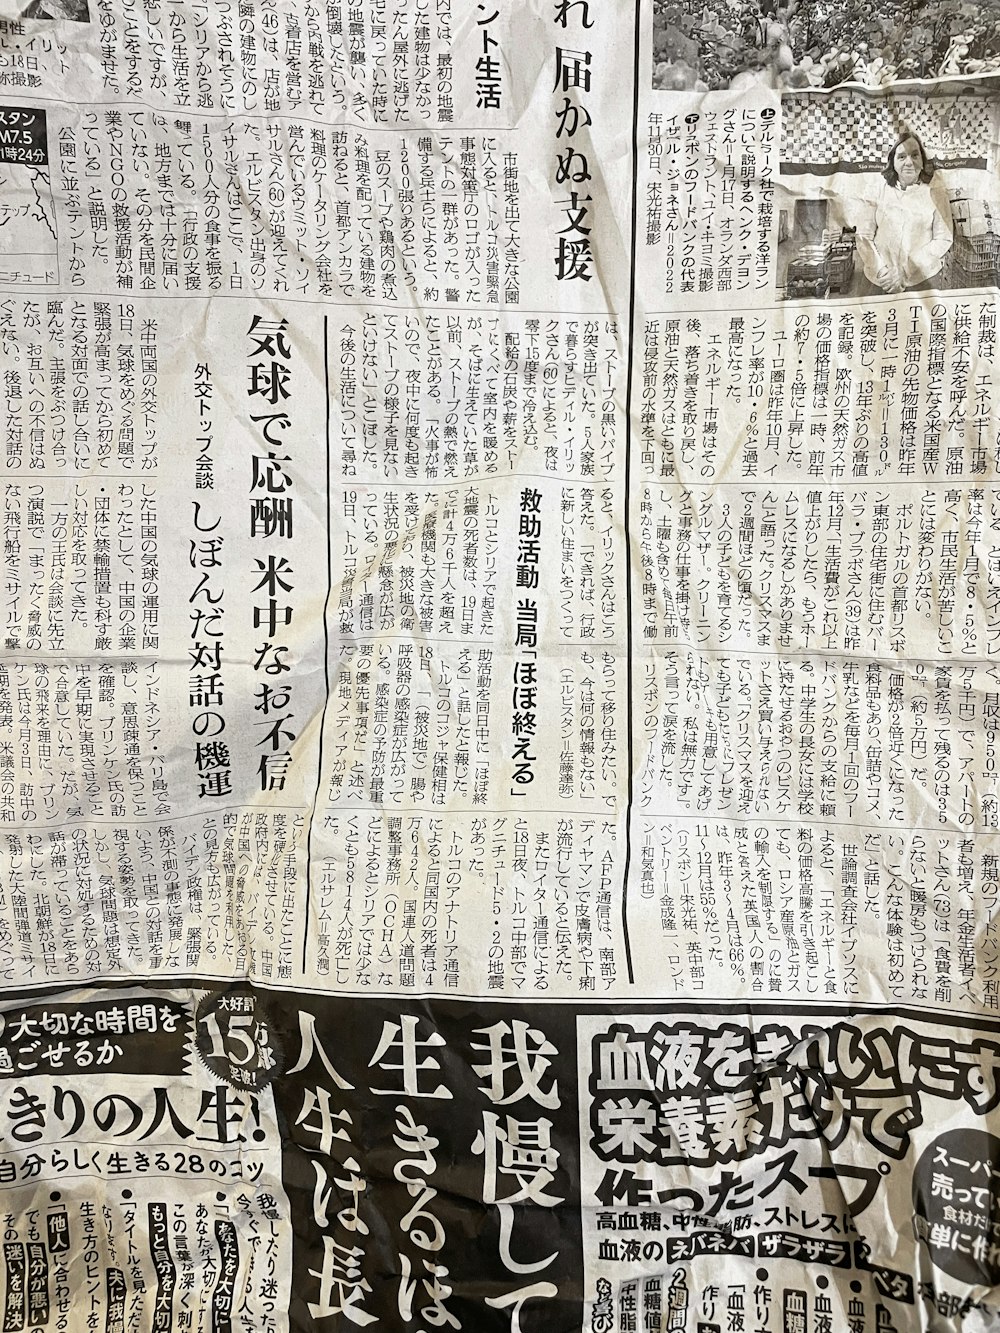 a newspaper with asian writing on it